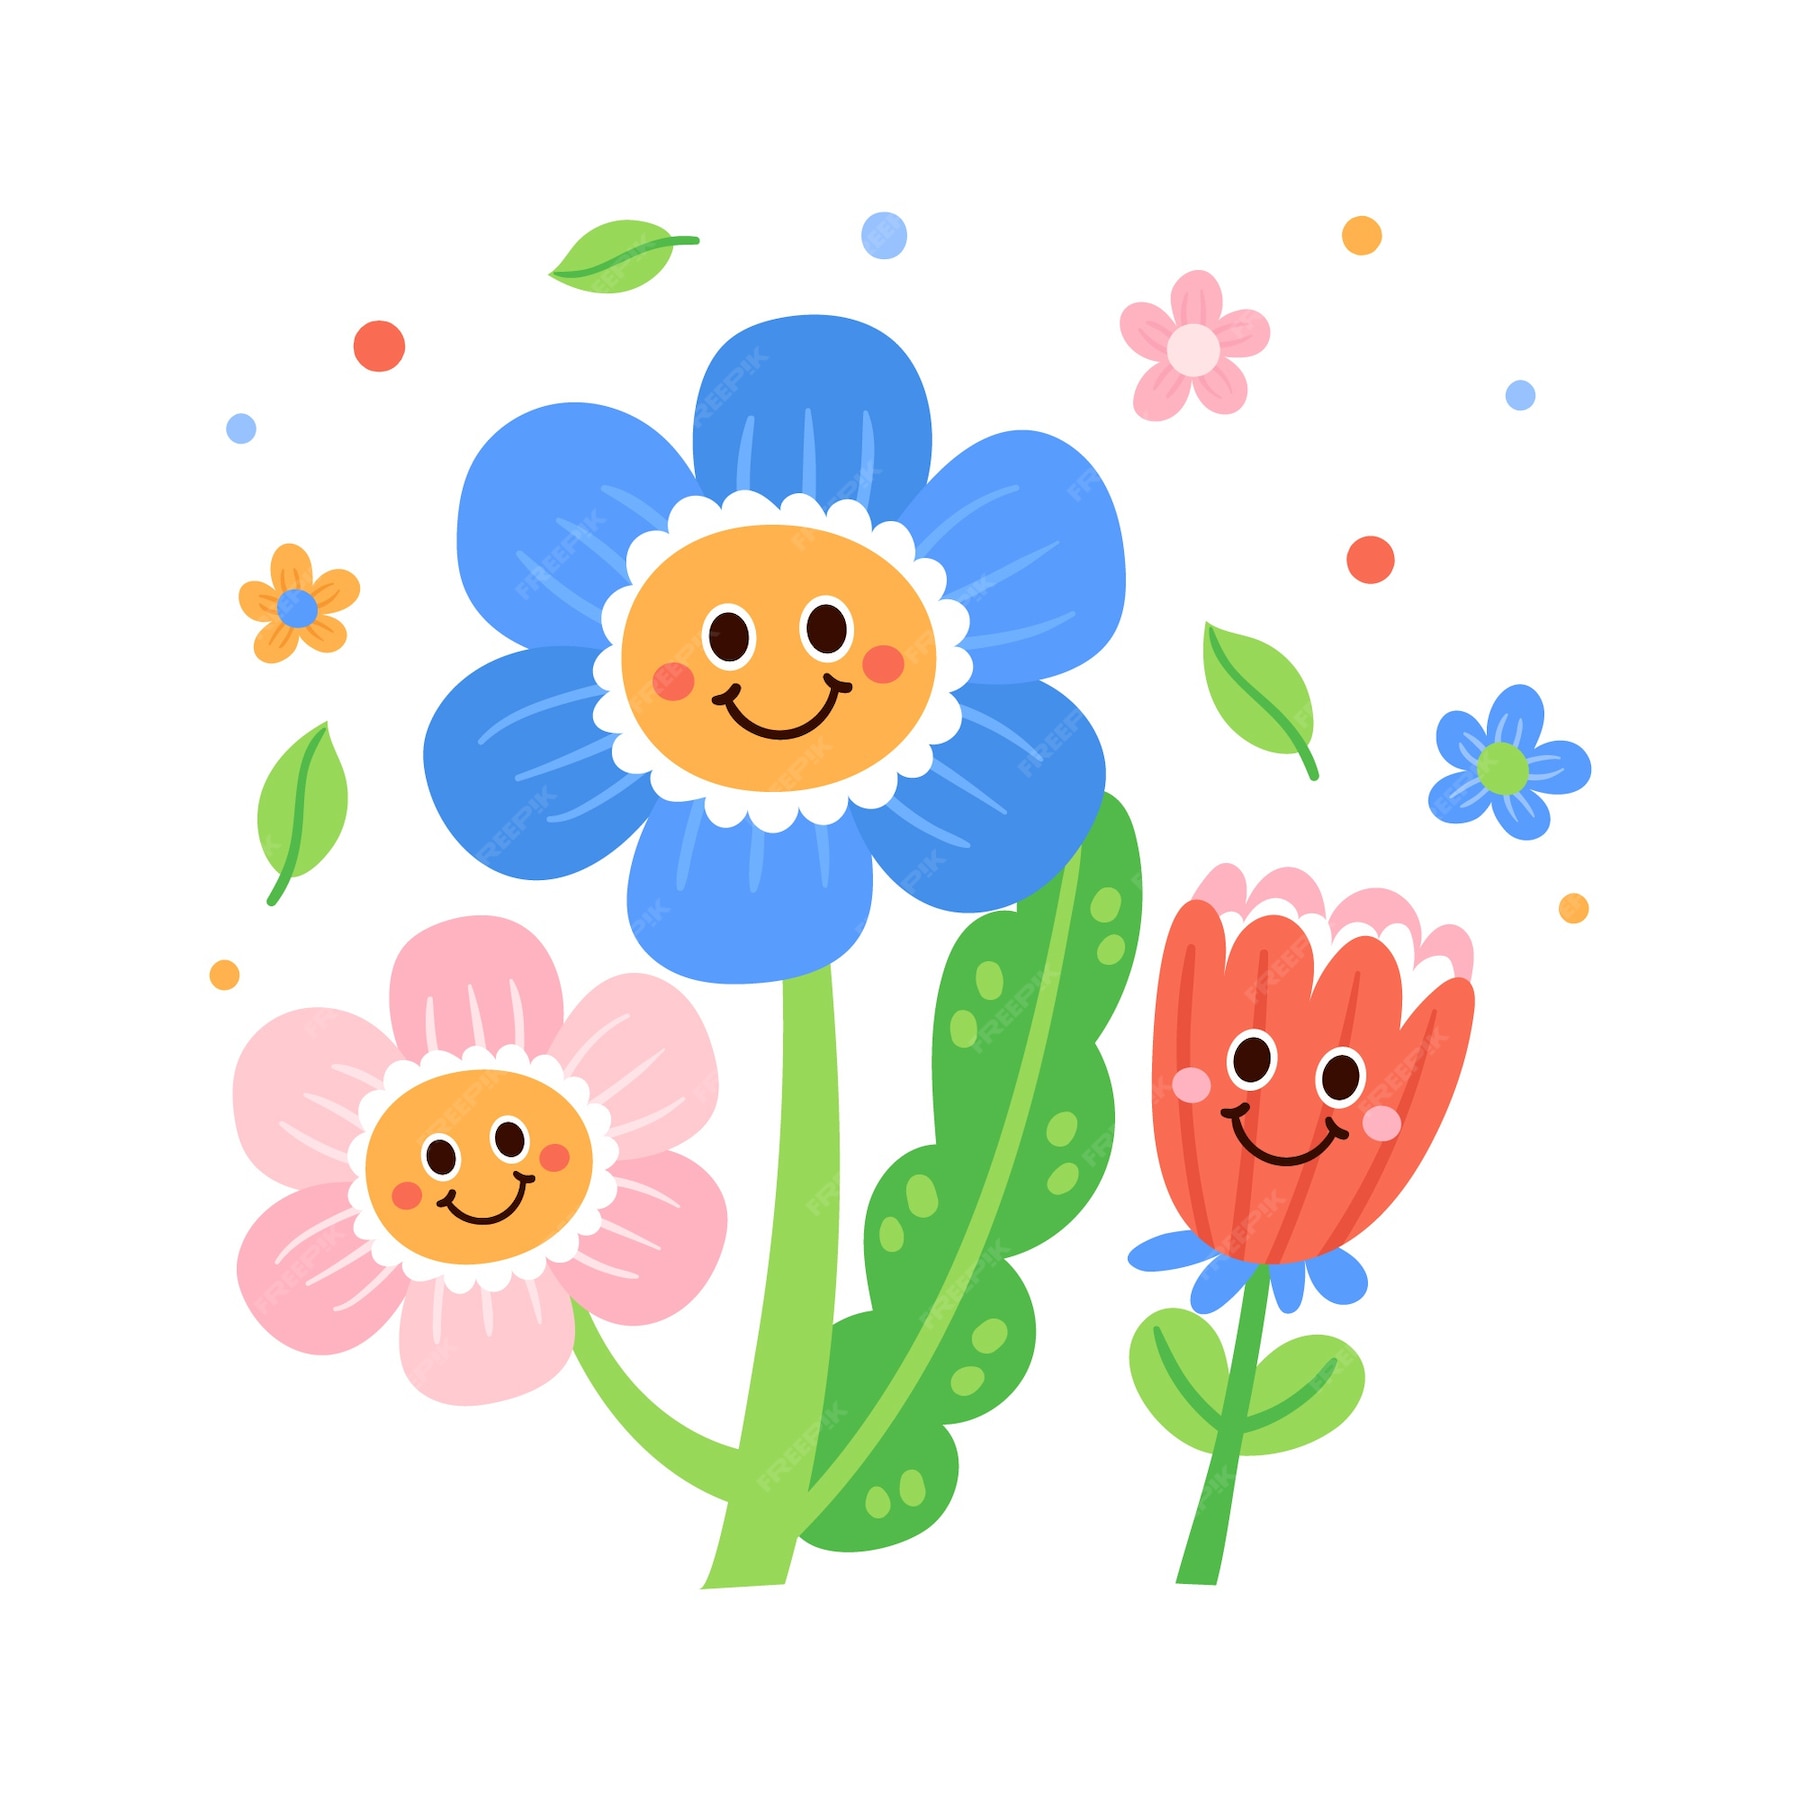 Premium Vector | Hand drawn smiley face flowers illustration